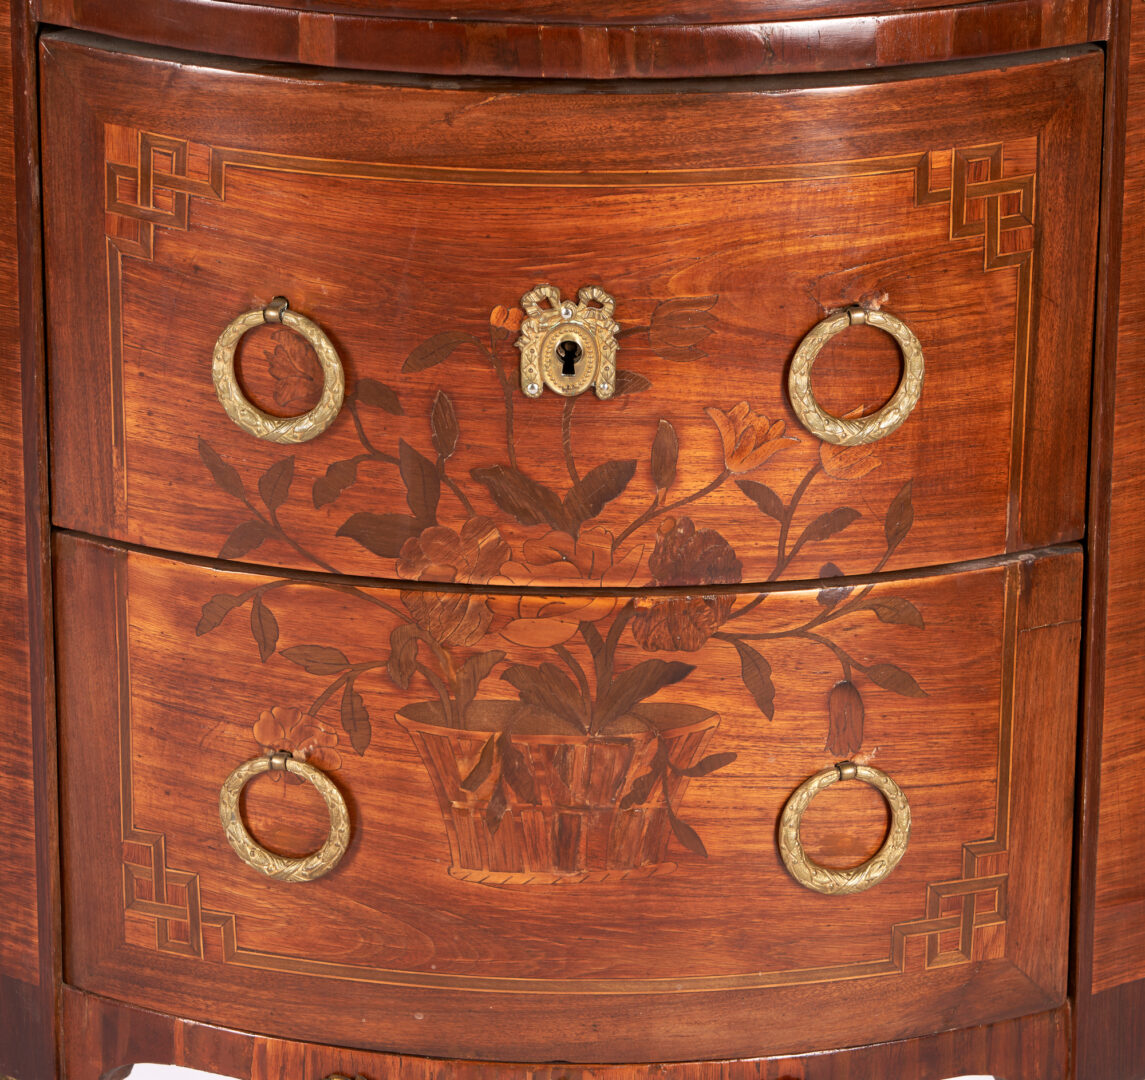 Lot 905: Near Pair of Louis XVI Style Marquetry Demilune Commodes